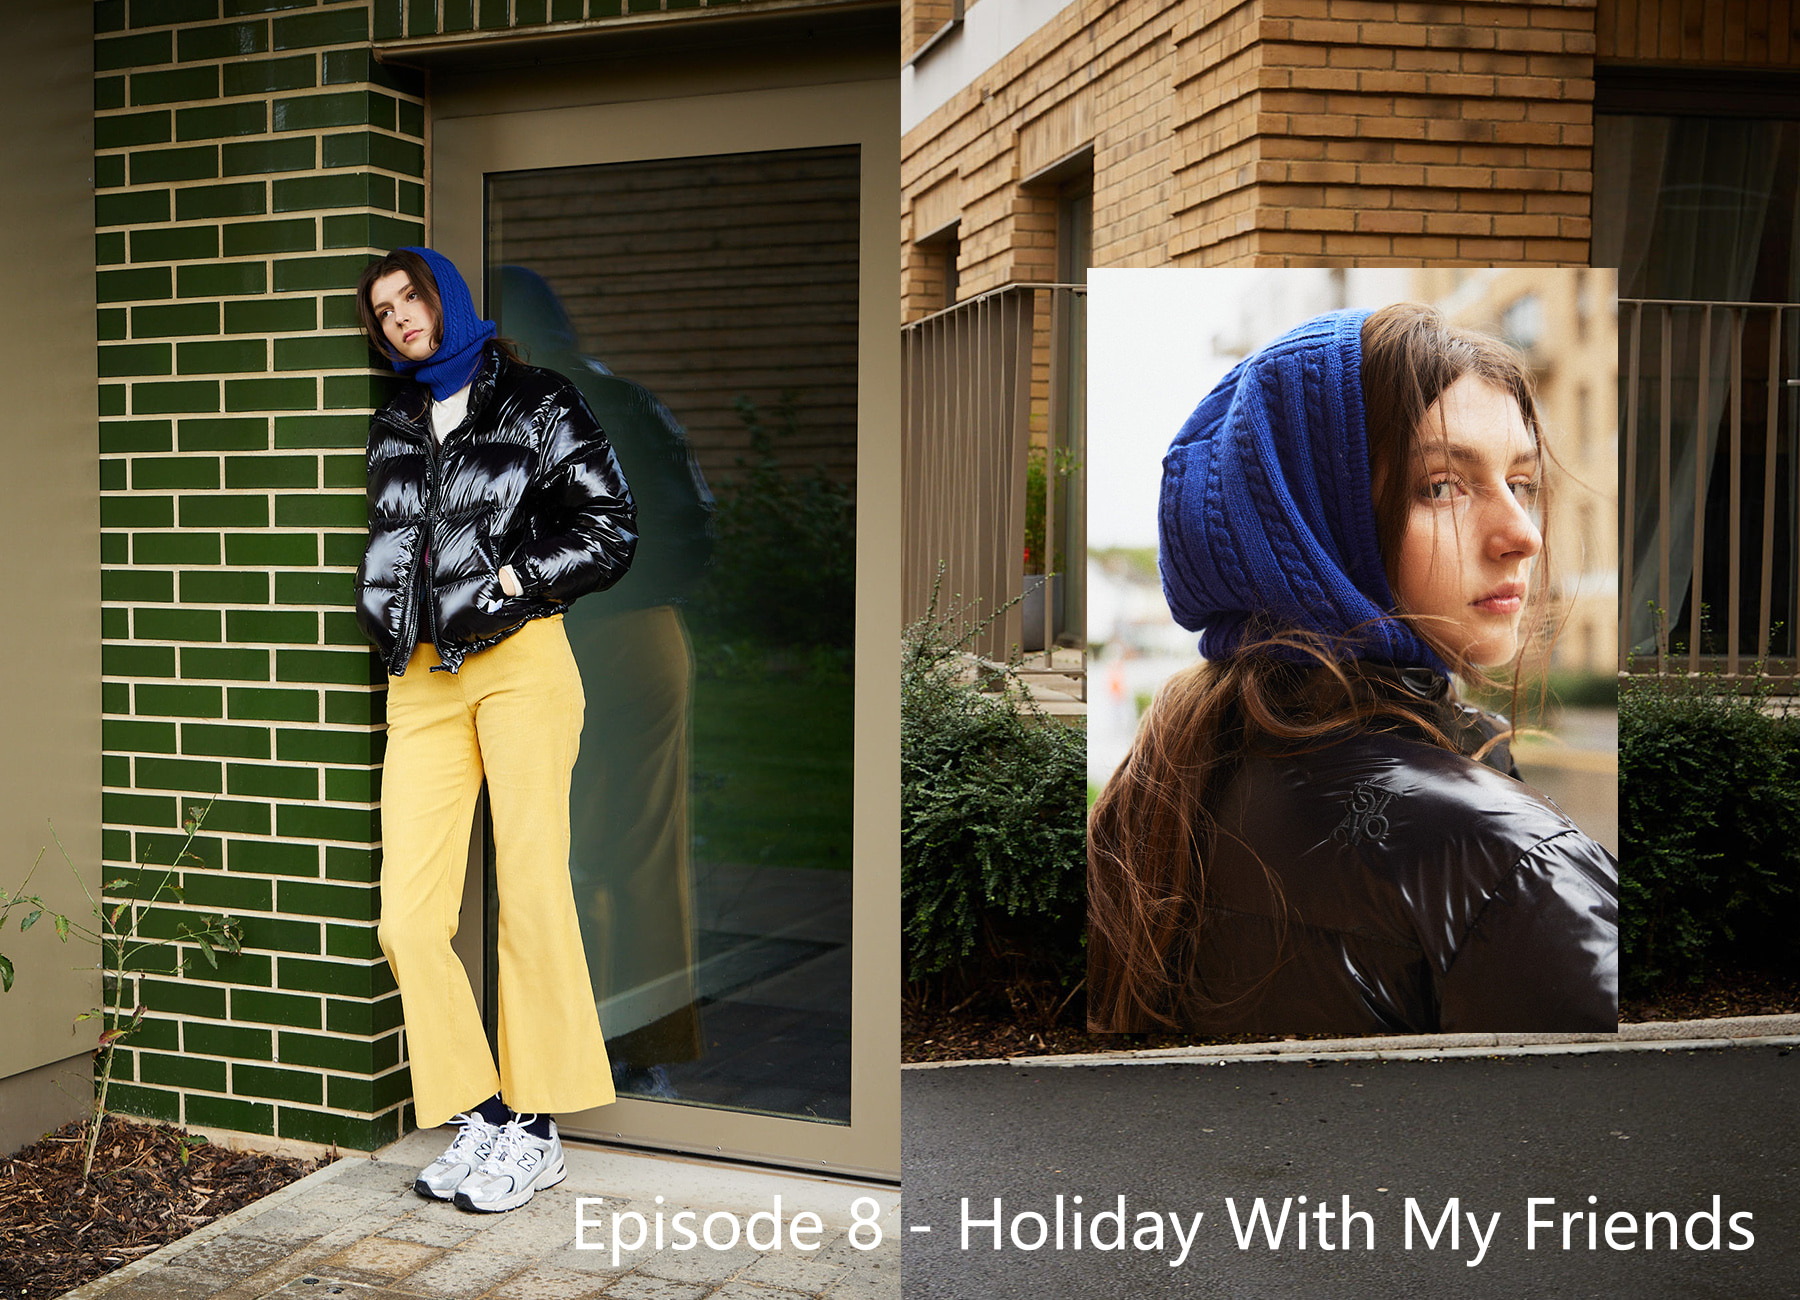 Episode 8 - Holiday With My Friends